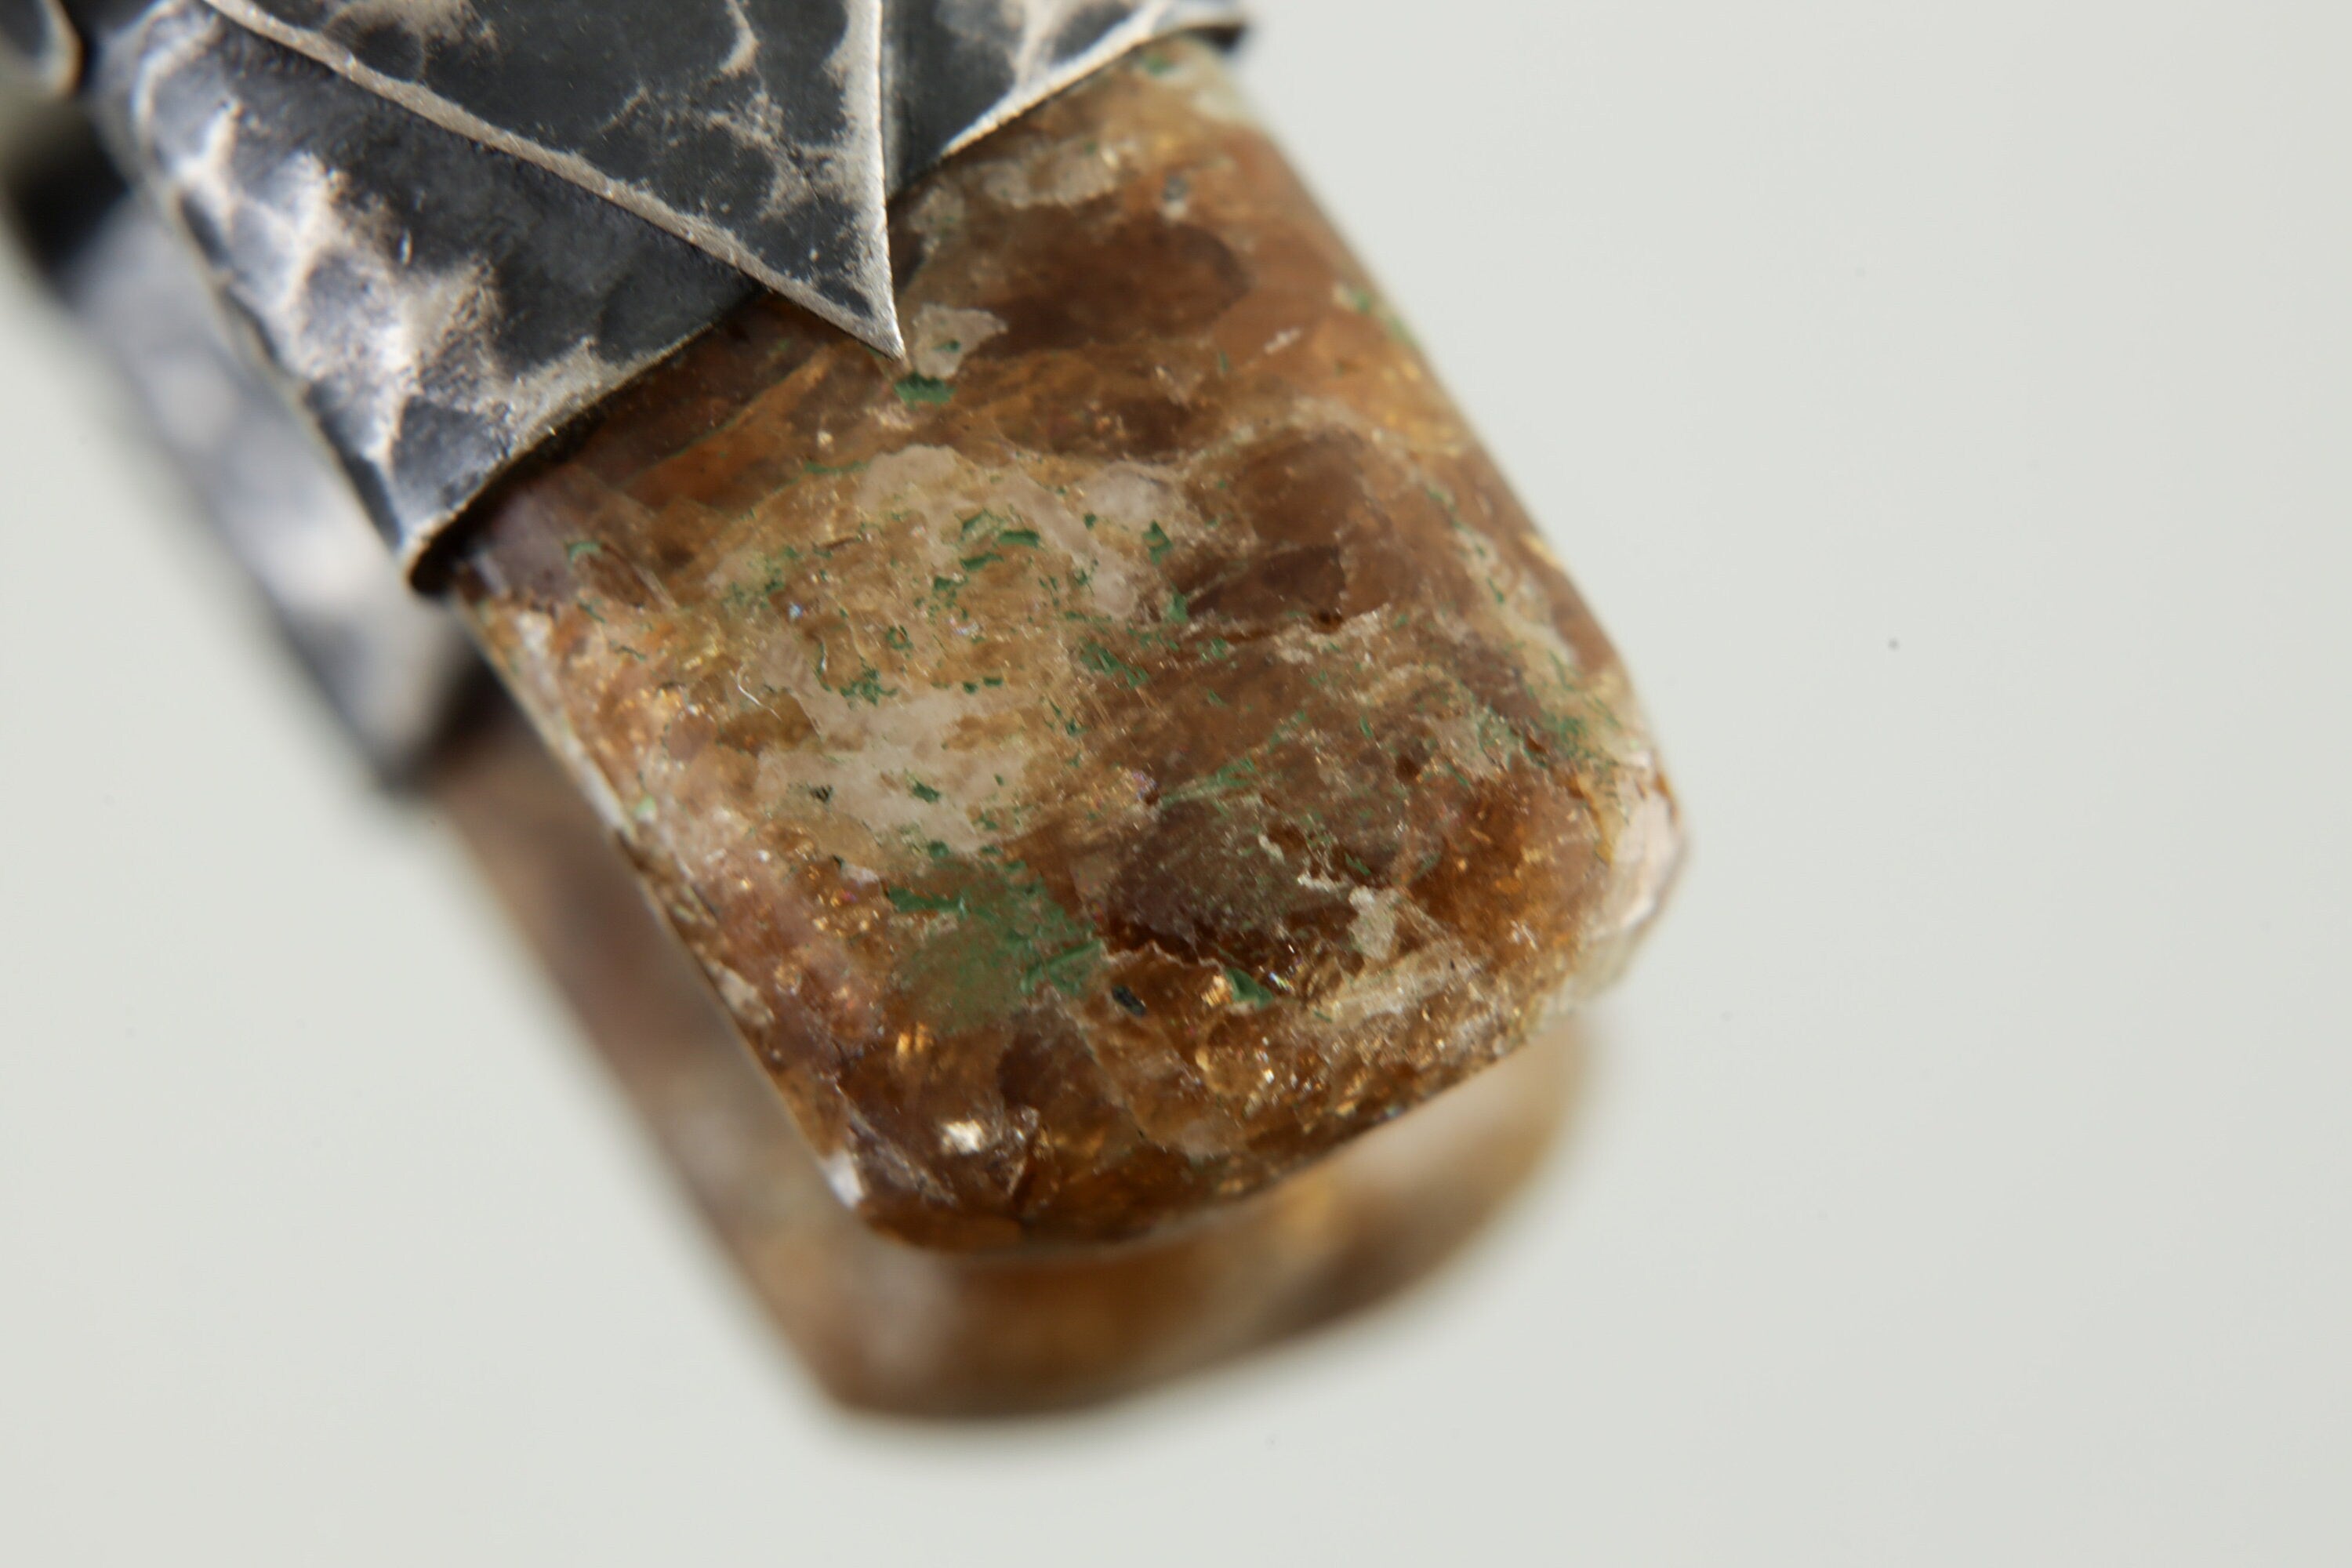 Brown Himalayan Gem Dravite Tourmaline - Stack Pendant - Organic Textured 925 Sterling Silver - Crystal Necklace- NO/02